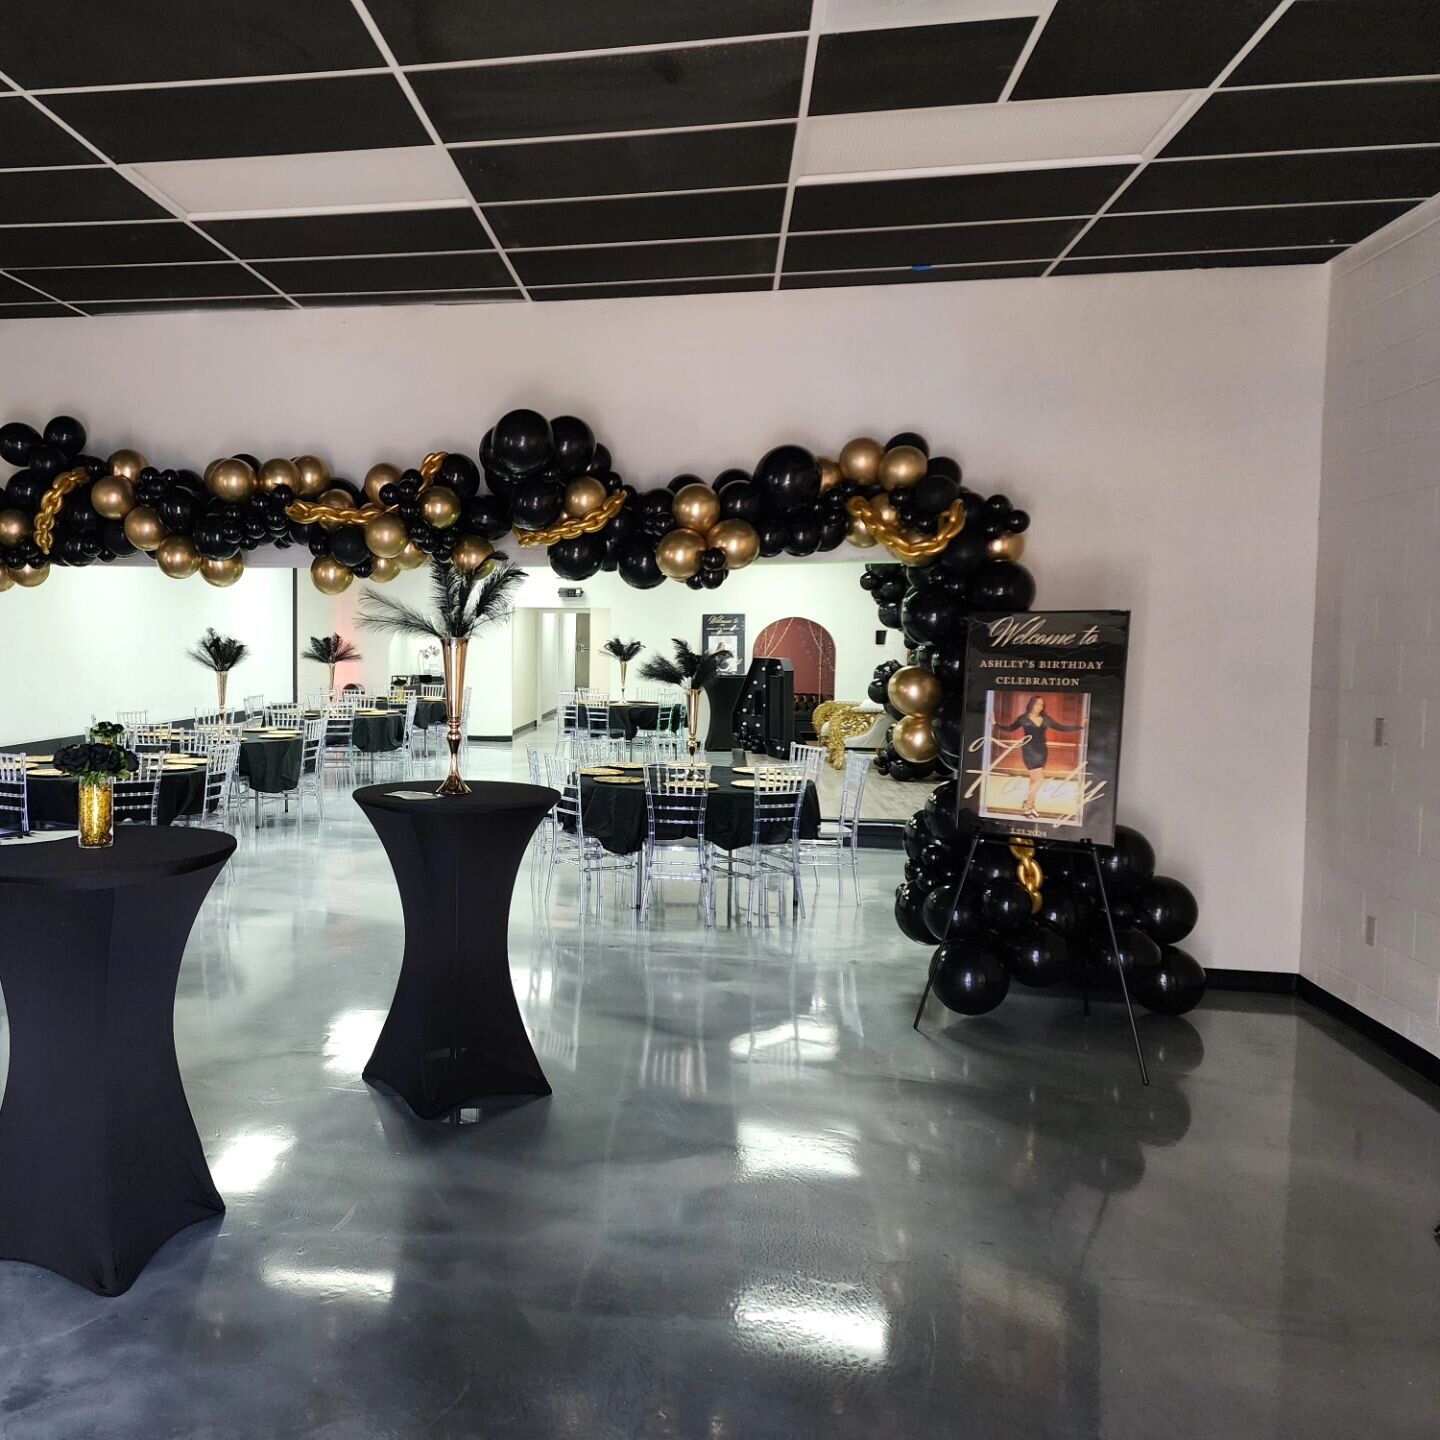 Look at REIGN being all fancy 😍 

Book your tour today
Link in Bio
www.reignthevenue.com

#eventvenue #eventspace #downtownentertainment #downtownvenue #venue #venuespace #venue #fredericksburg #fredericksburgva #spotsylvania #downtownfredericksburg